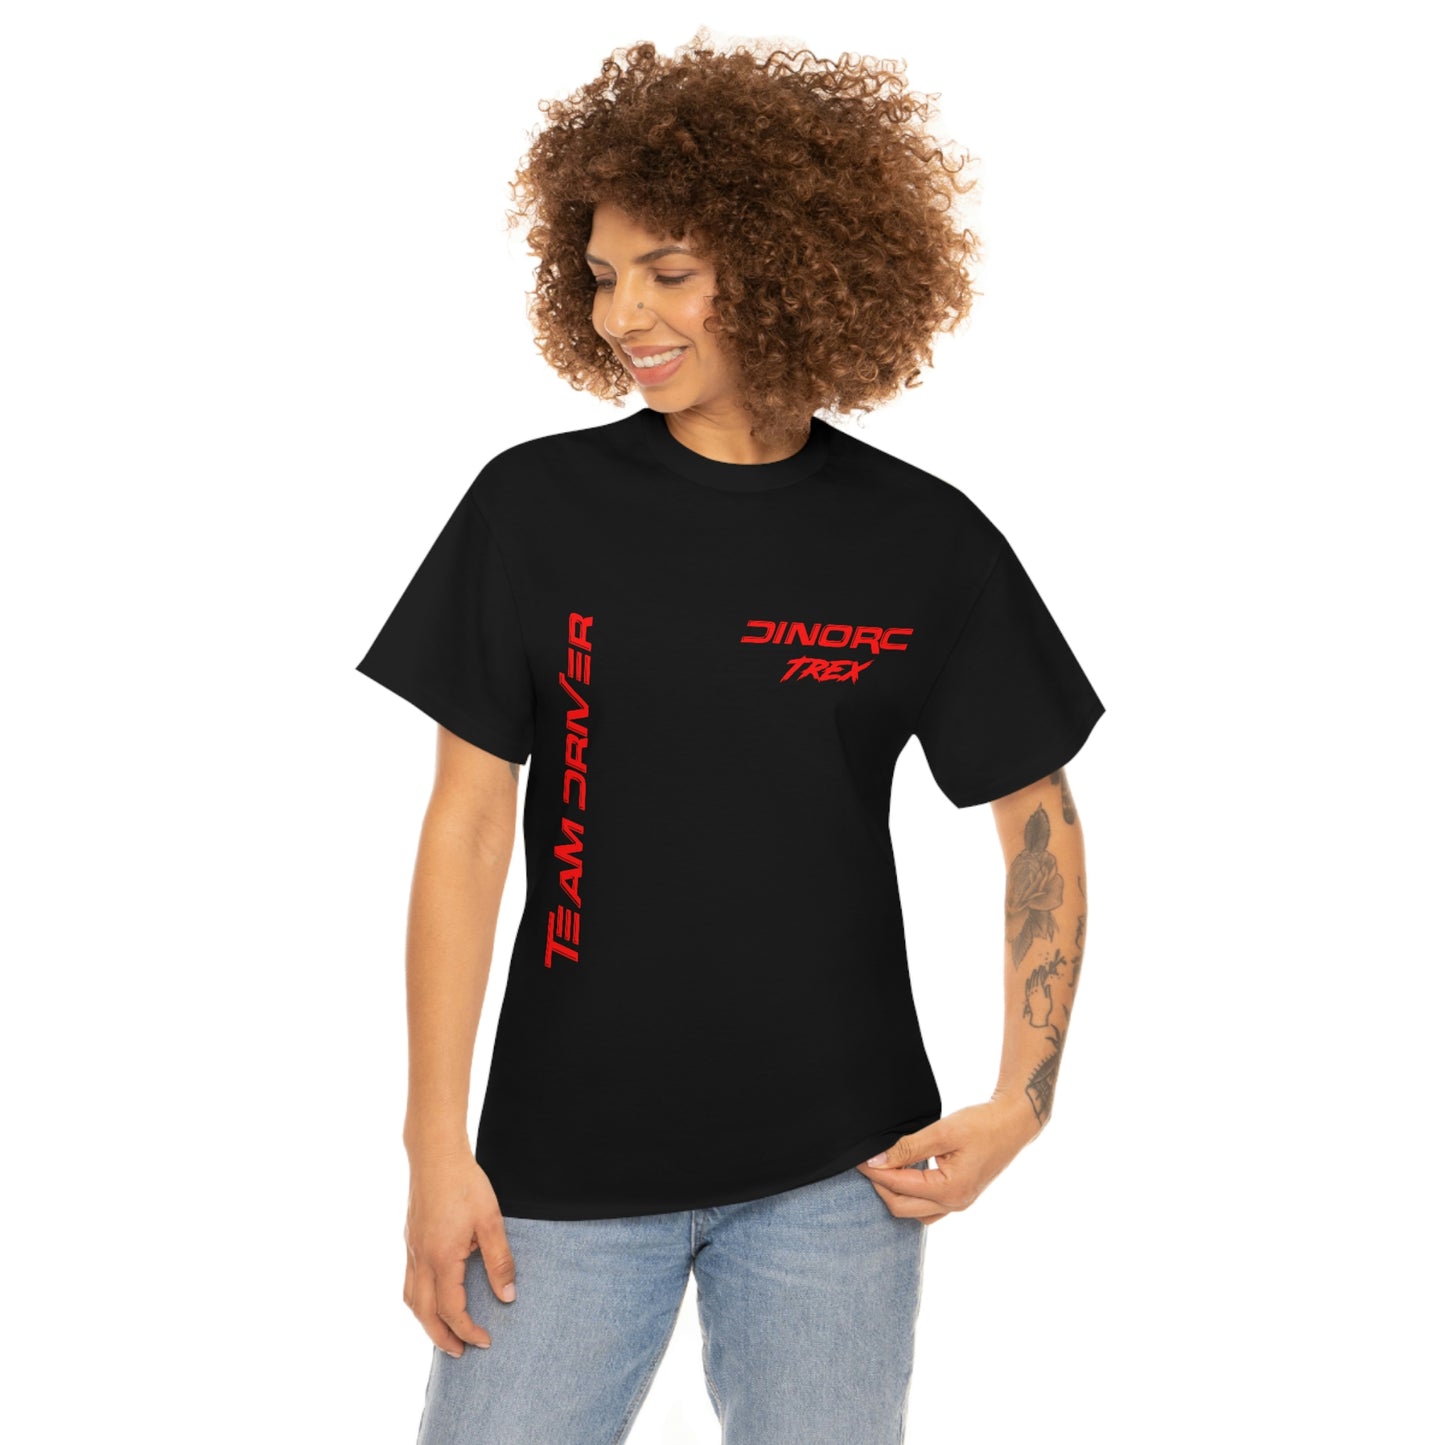 Team Driver Anthony Johnson (TRex) Front and Back DinoRc Logo T-Shirt S-5x 5 colors